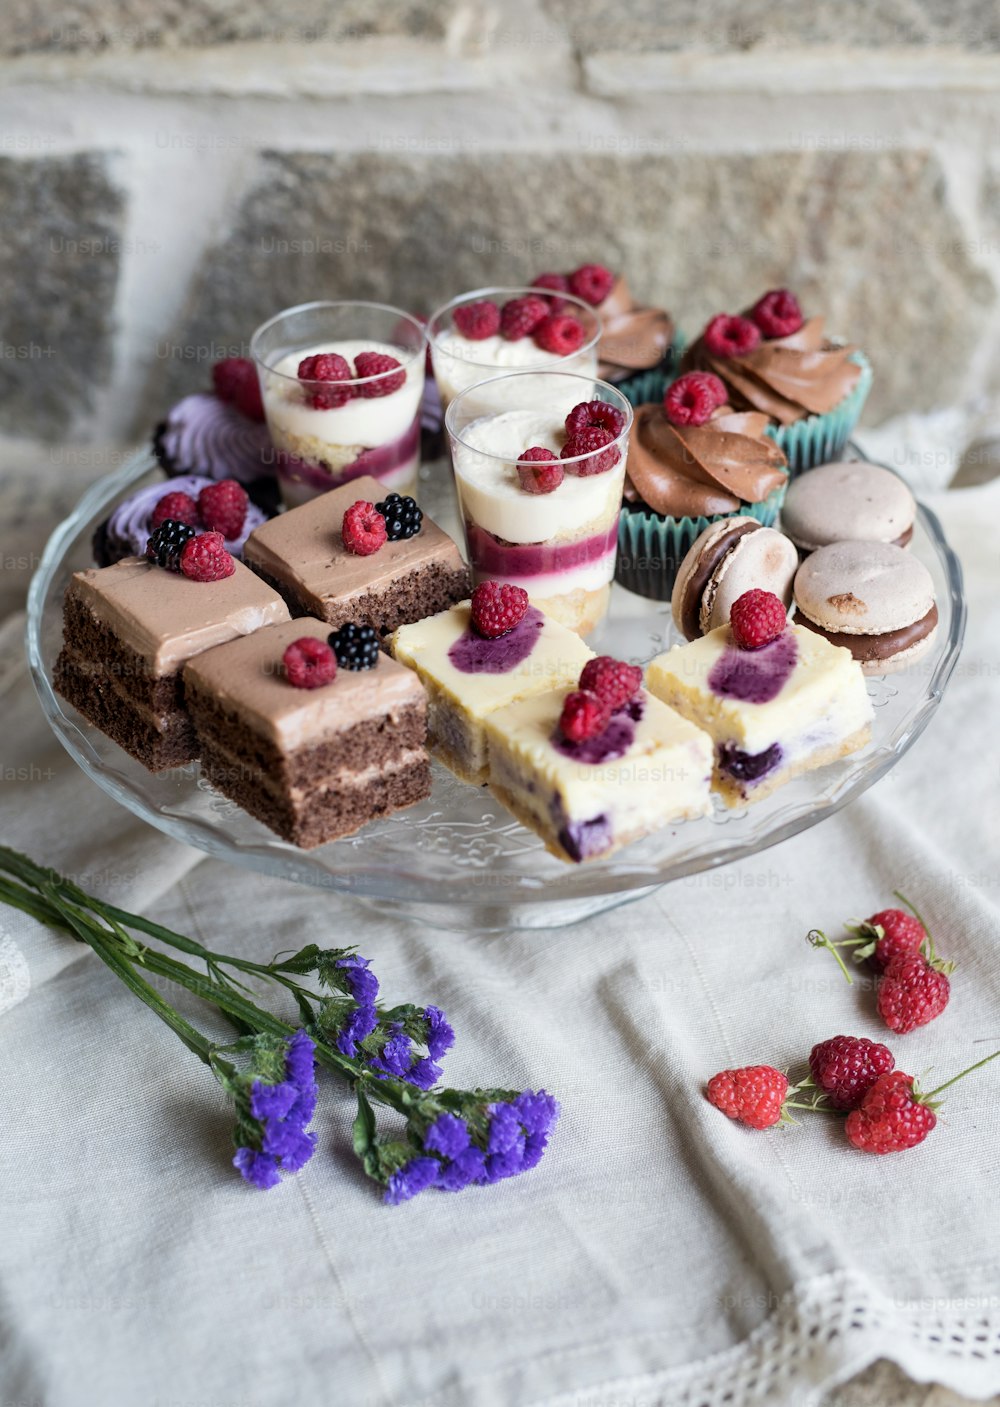 A top view of selection of colorful and delicious cake desserts on tray on table.